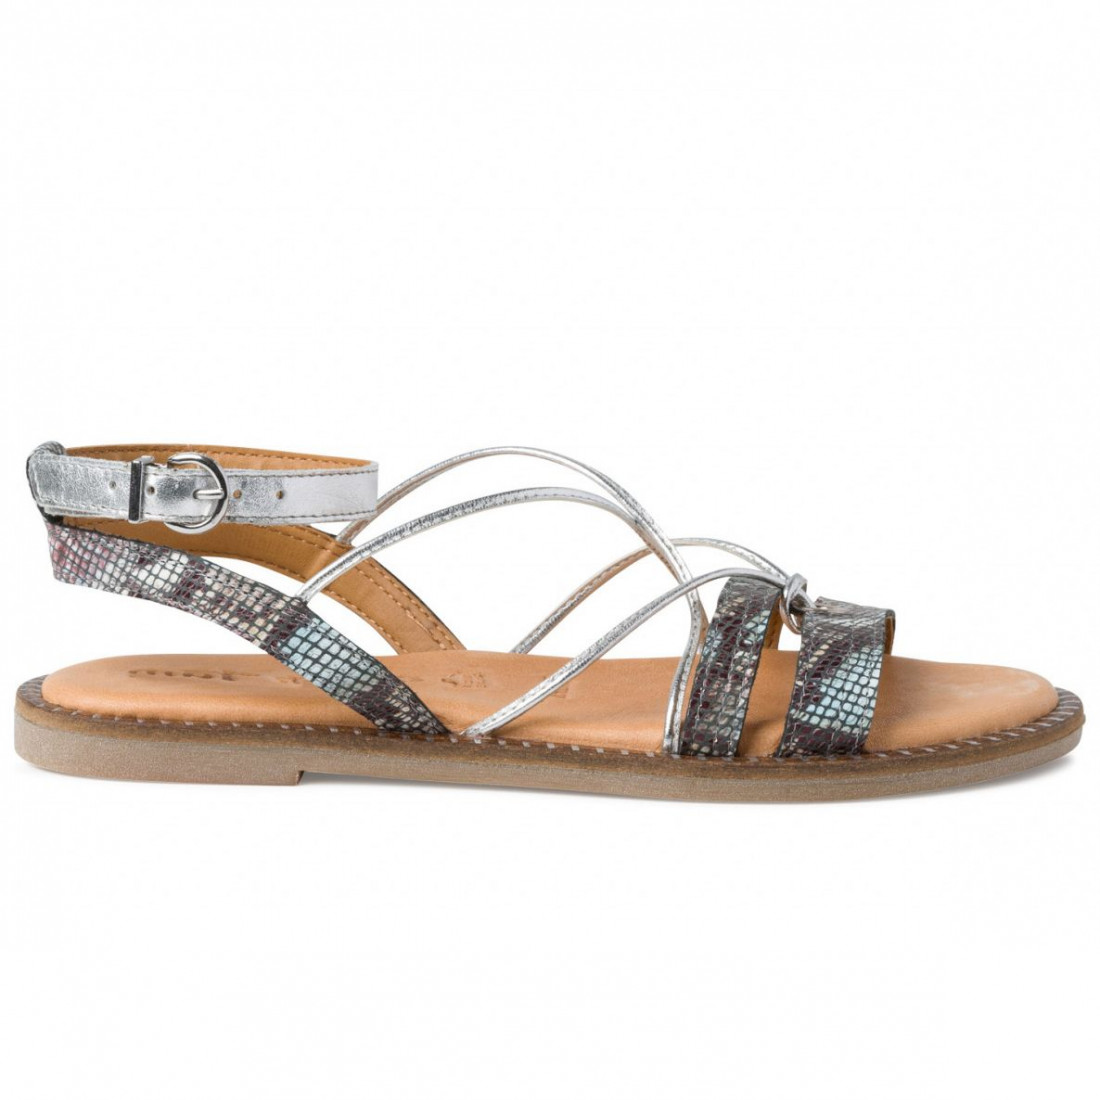 Tamaris flat sandals in blue and silver pyton effect with straps